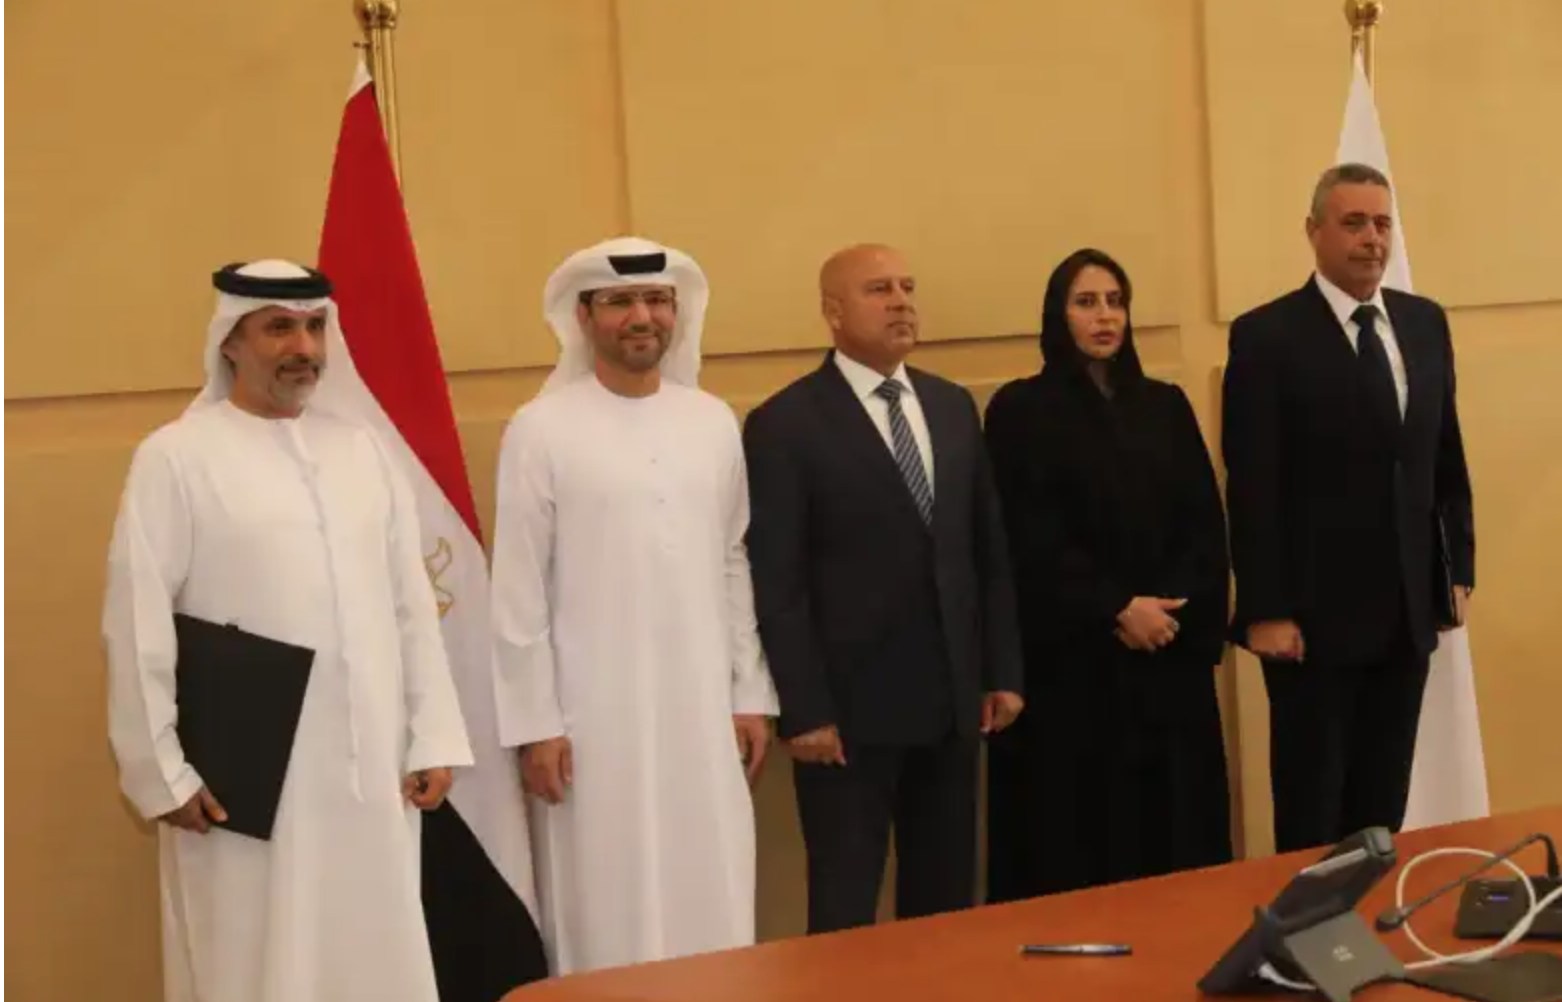 The Ministry of Transport signs a number of contracts with Abu Dhabi Ports in Safaga and East Port Said